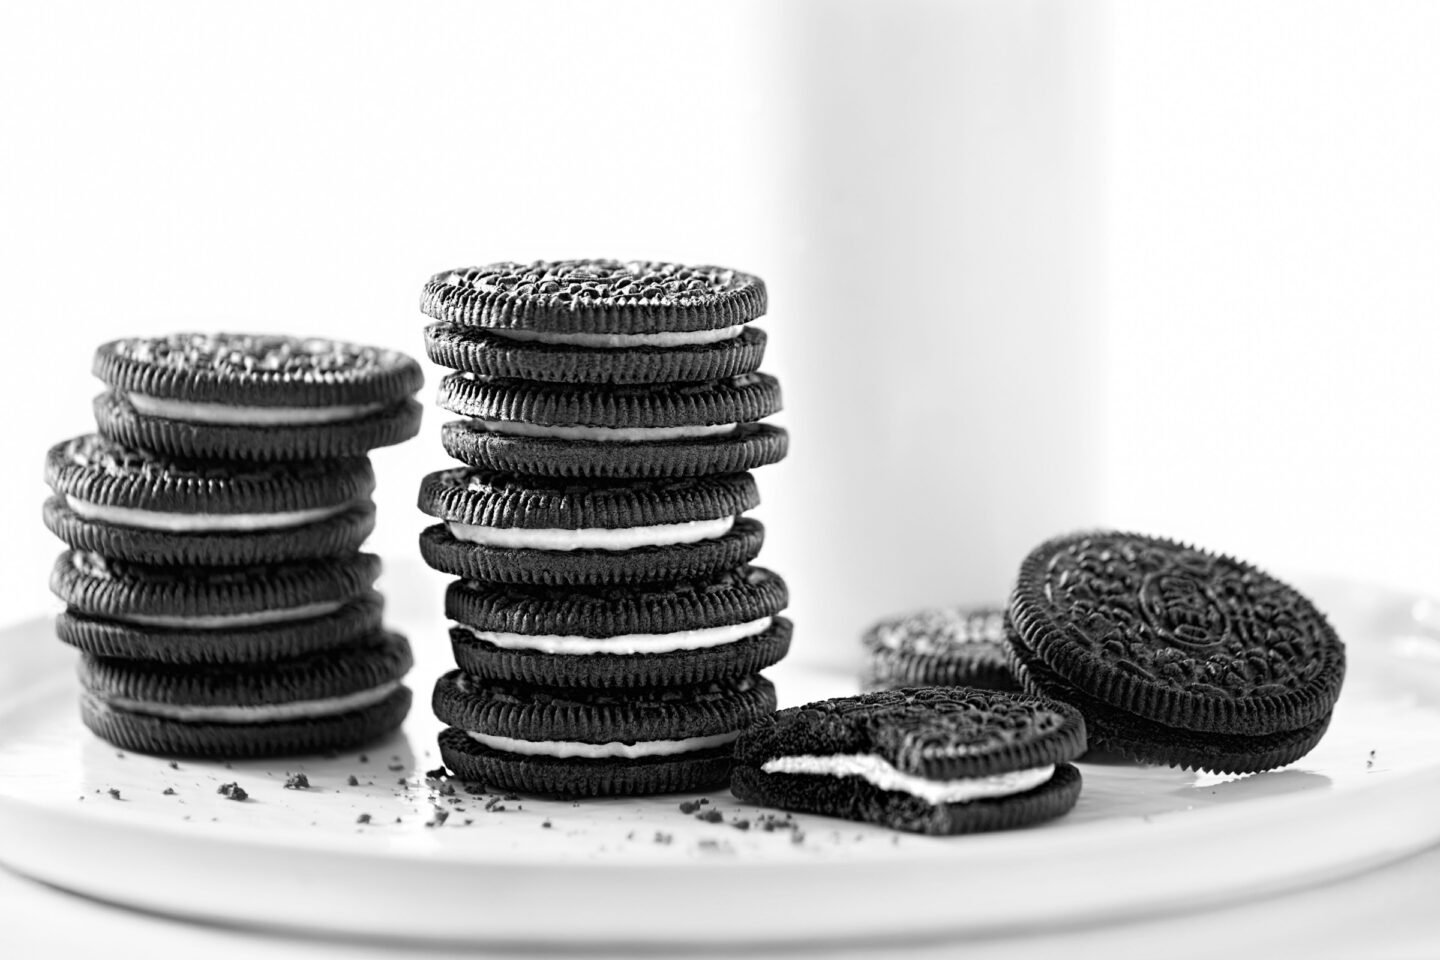 oreo stacks on a plate